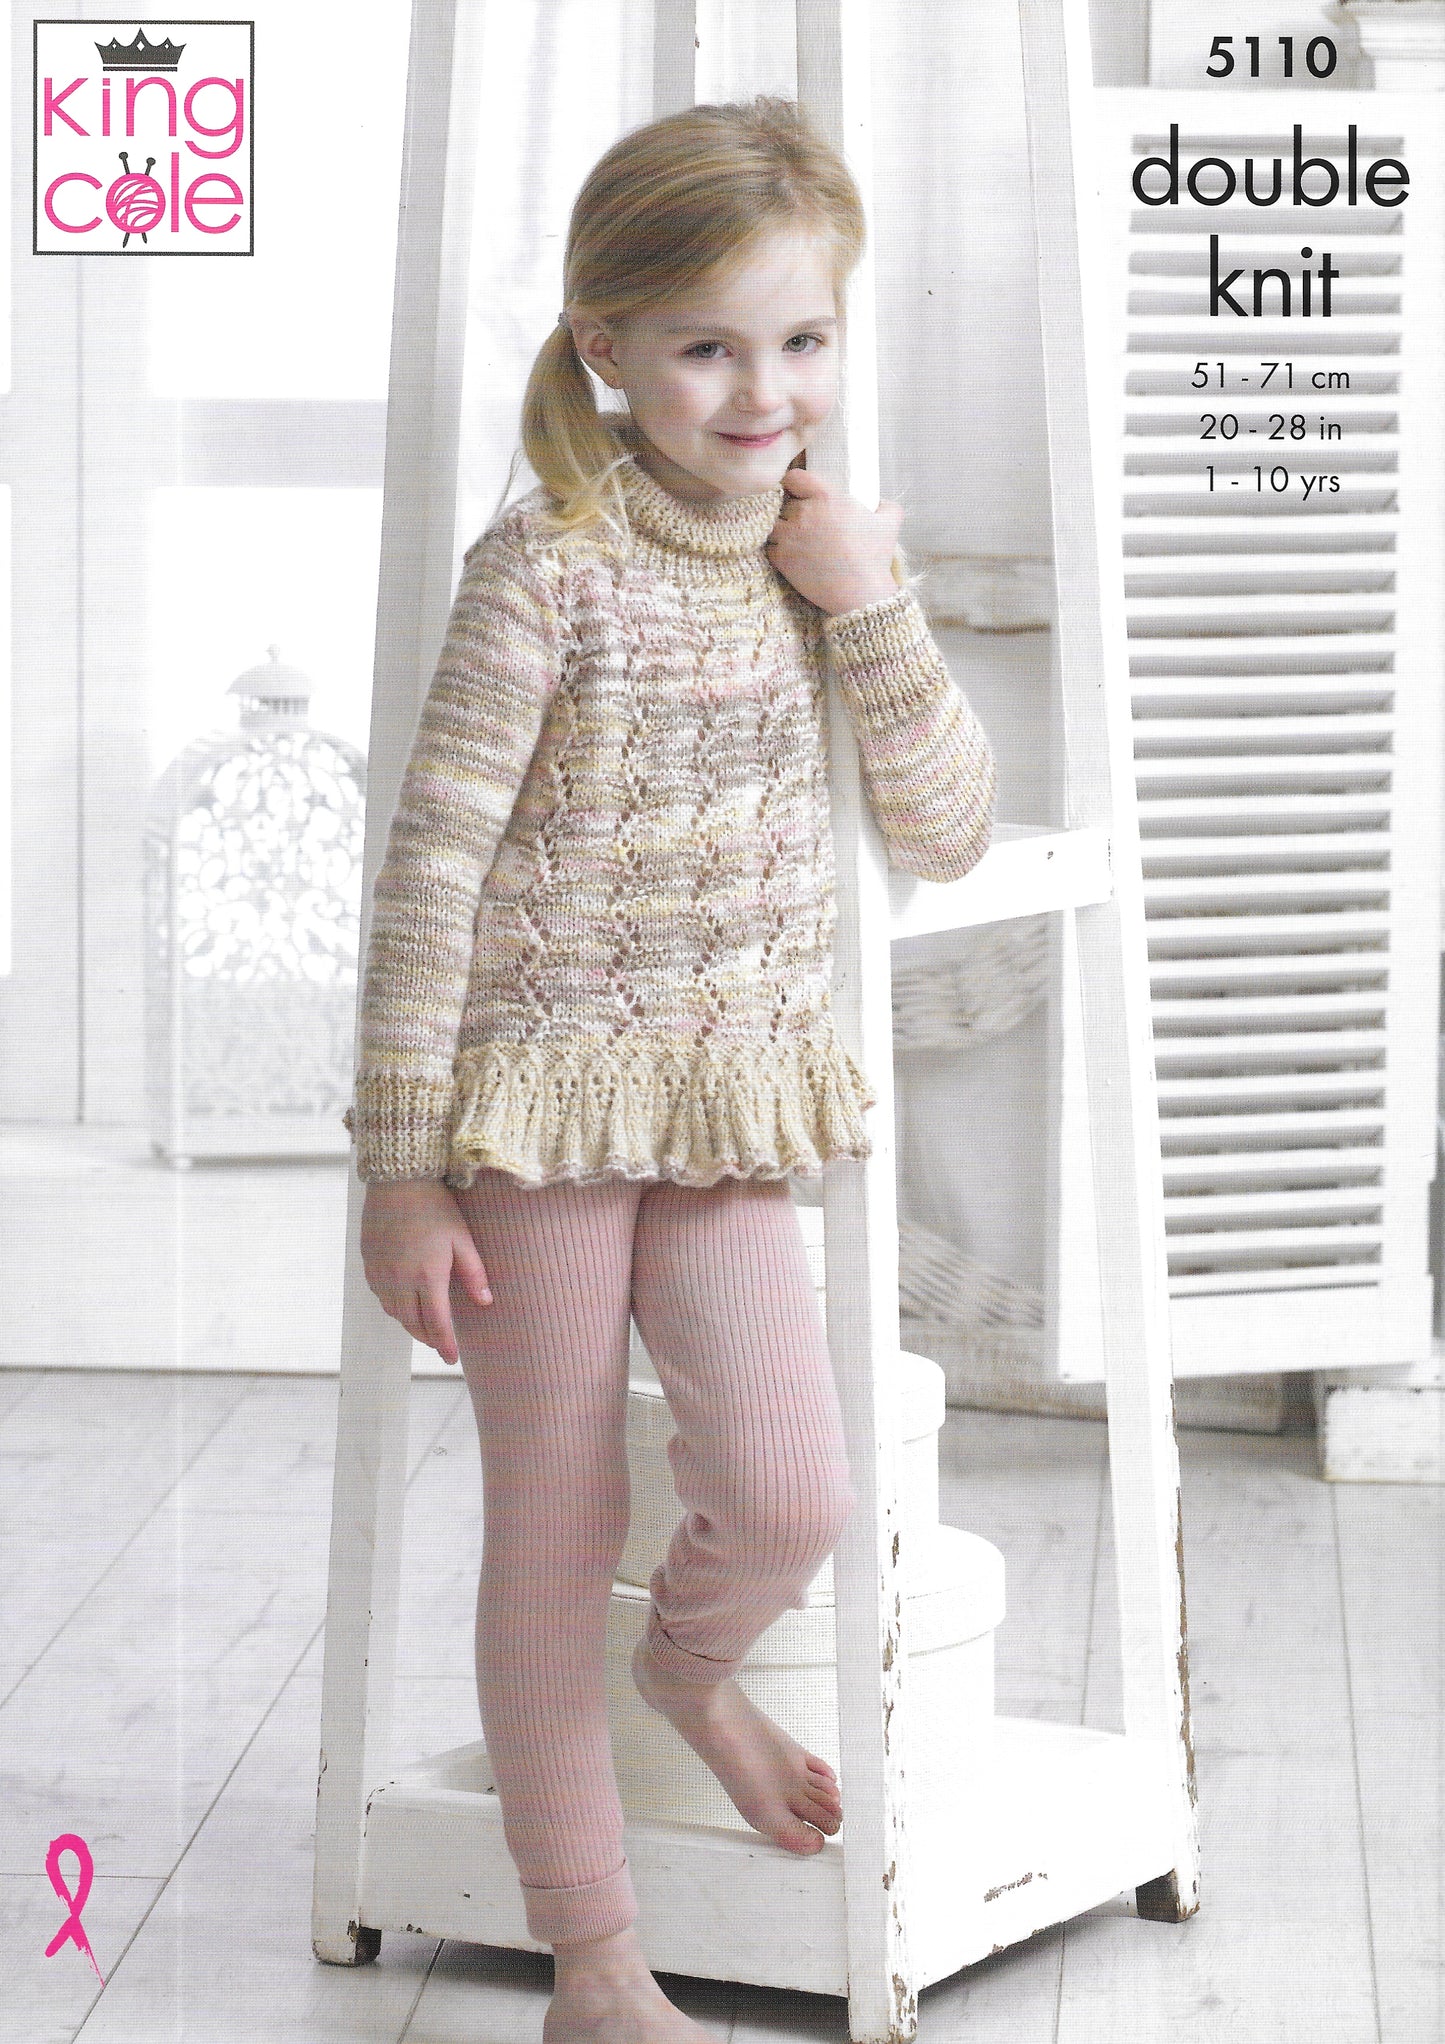 5110 King Cole double knit Sweater/Pullover knitting pattern